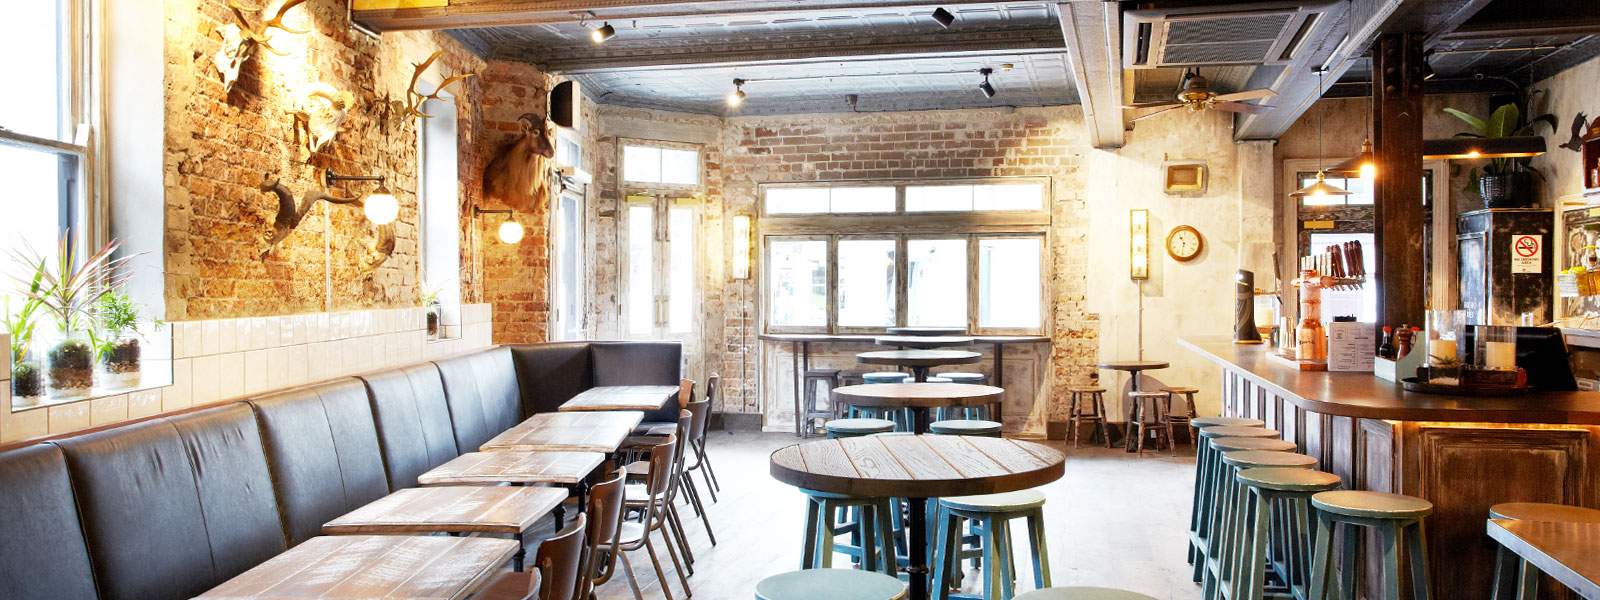 Durty Nelly's in Paddington has Been Reborn as The Village Inn